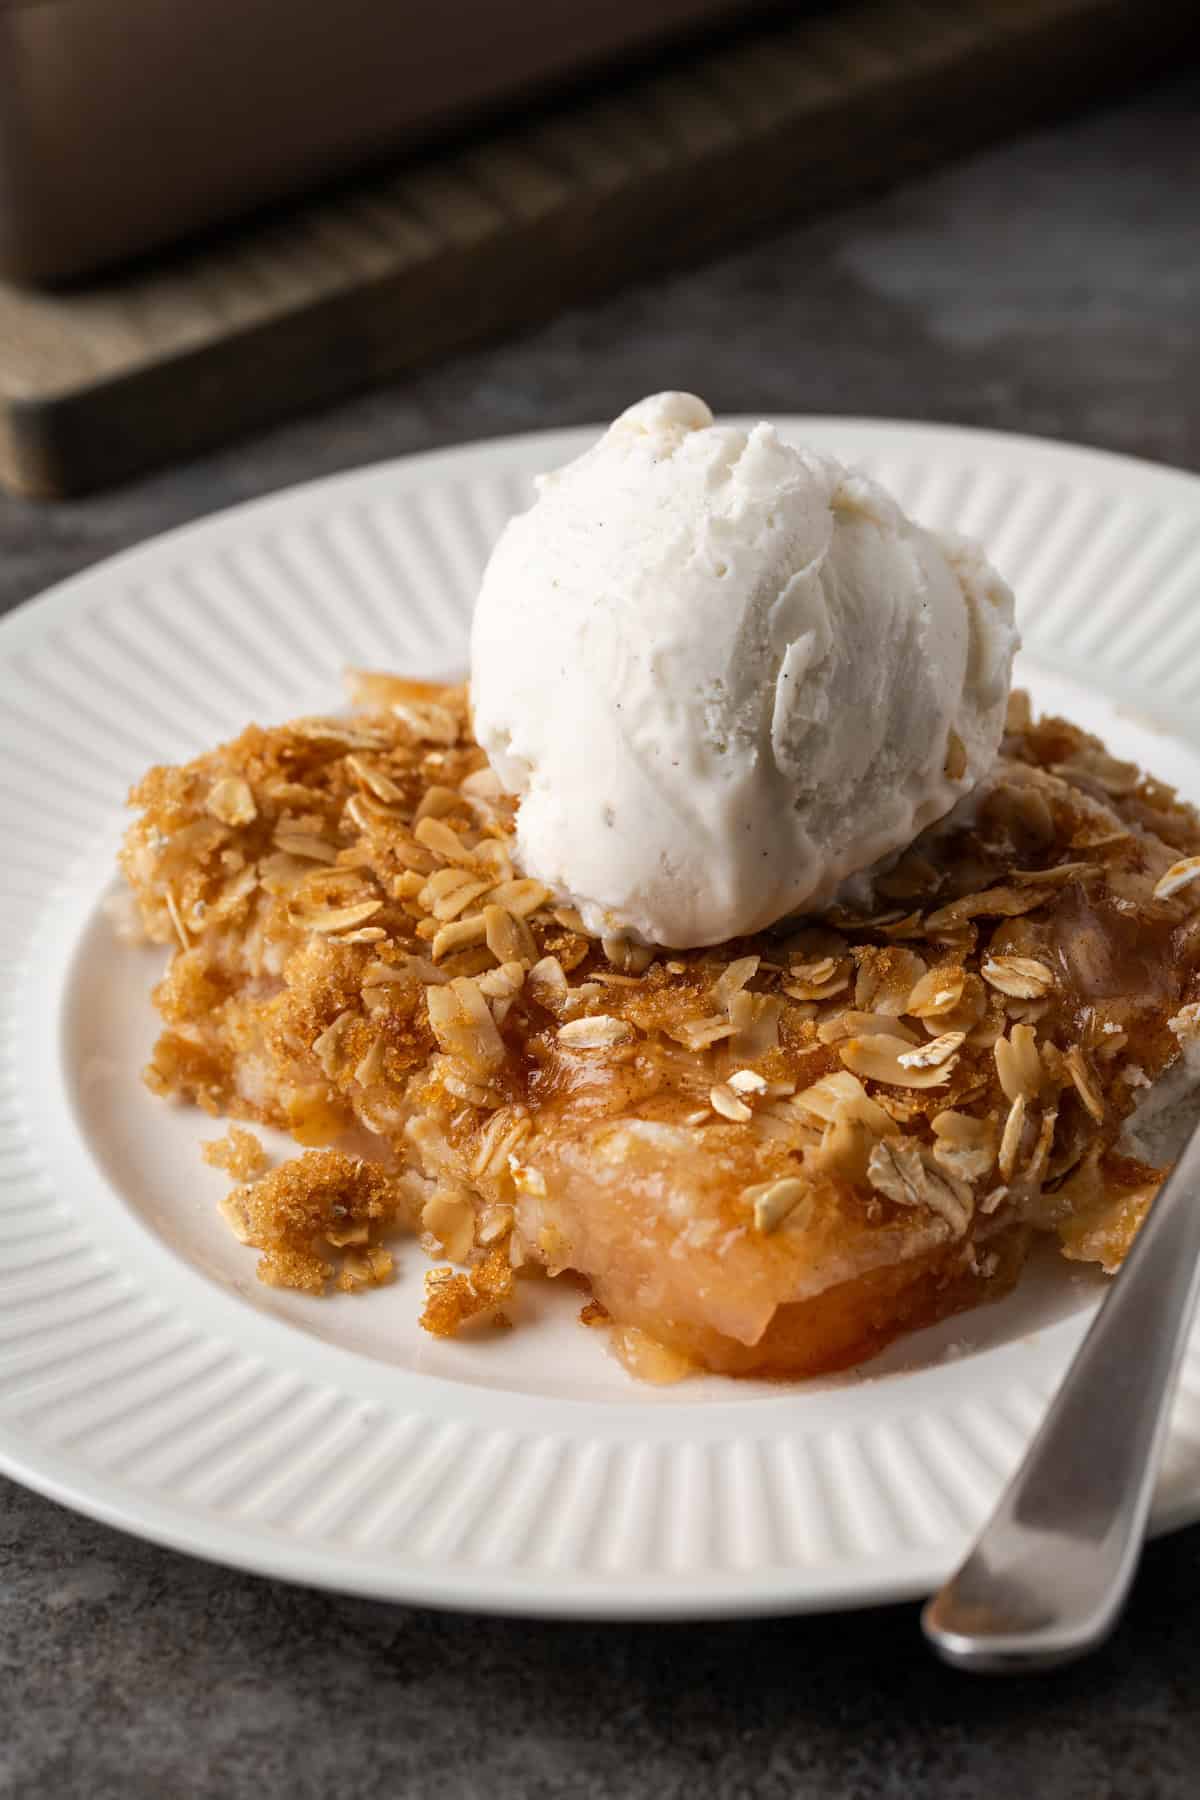 A serving of apple dump cake on a white plate topped with a scoop of ice cream, next to a spoon.